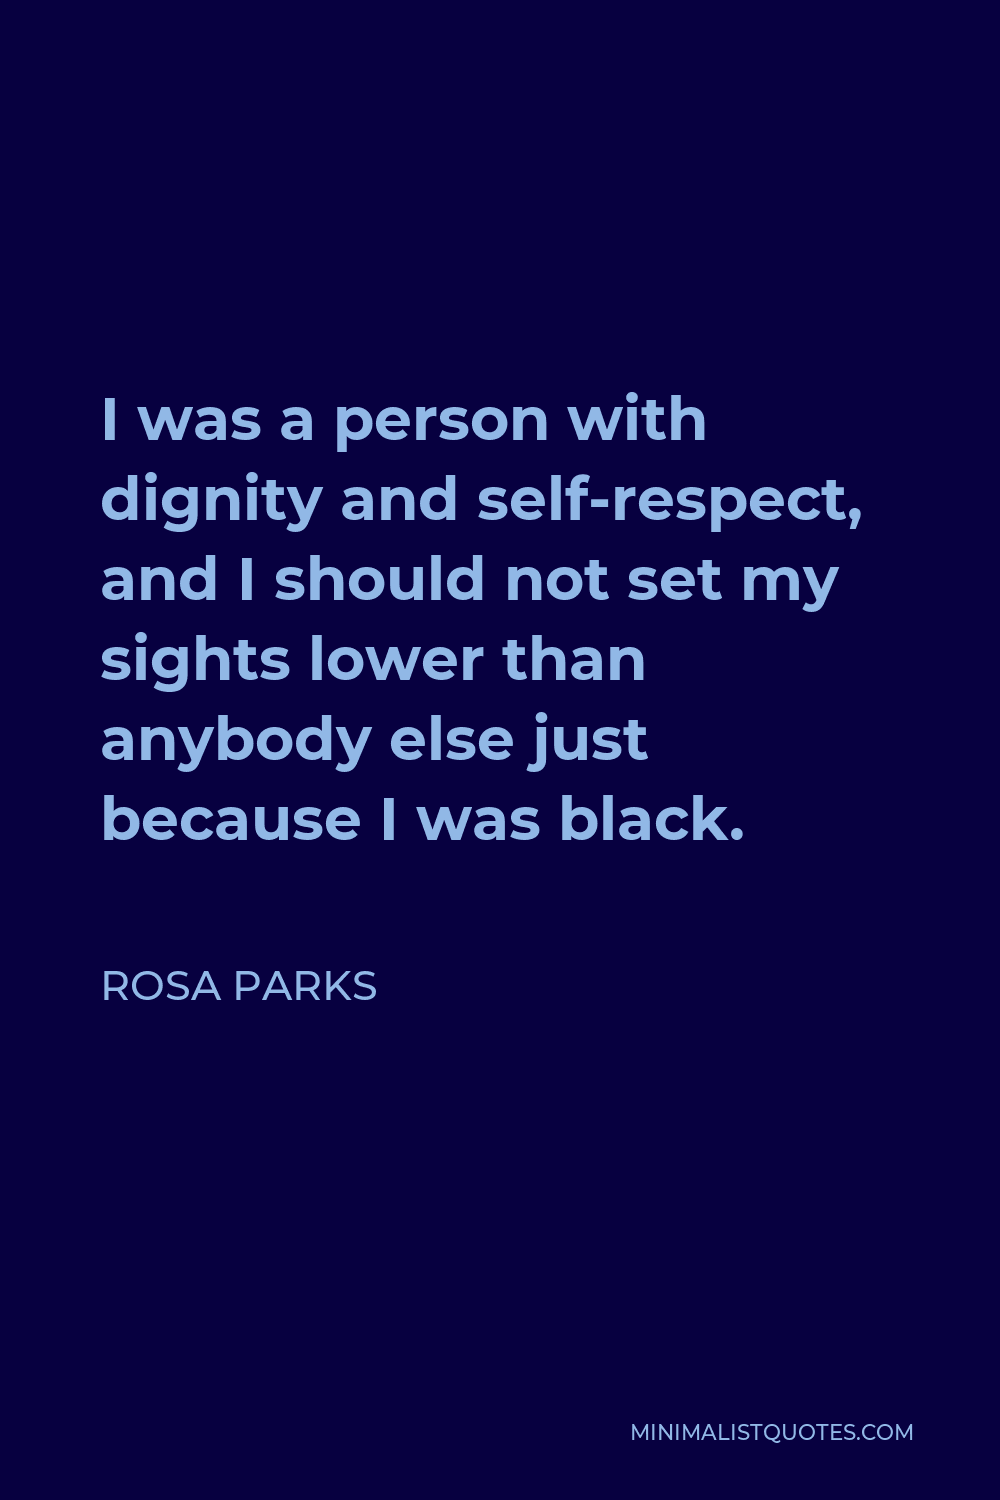 Rosa Parks Quote - I was a person with dignity and self-respect, and I should not set my sights lower than anybody else just because I was black.